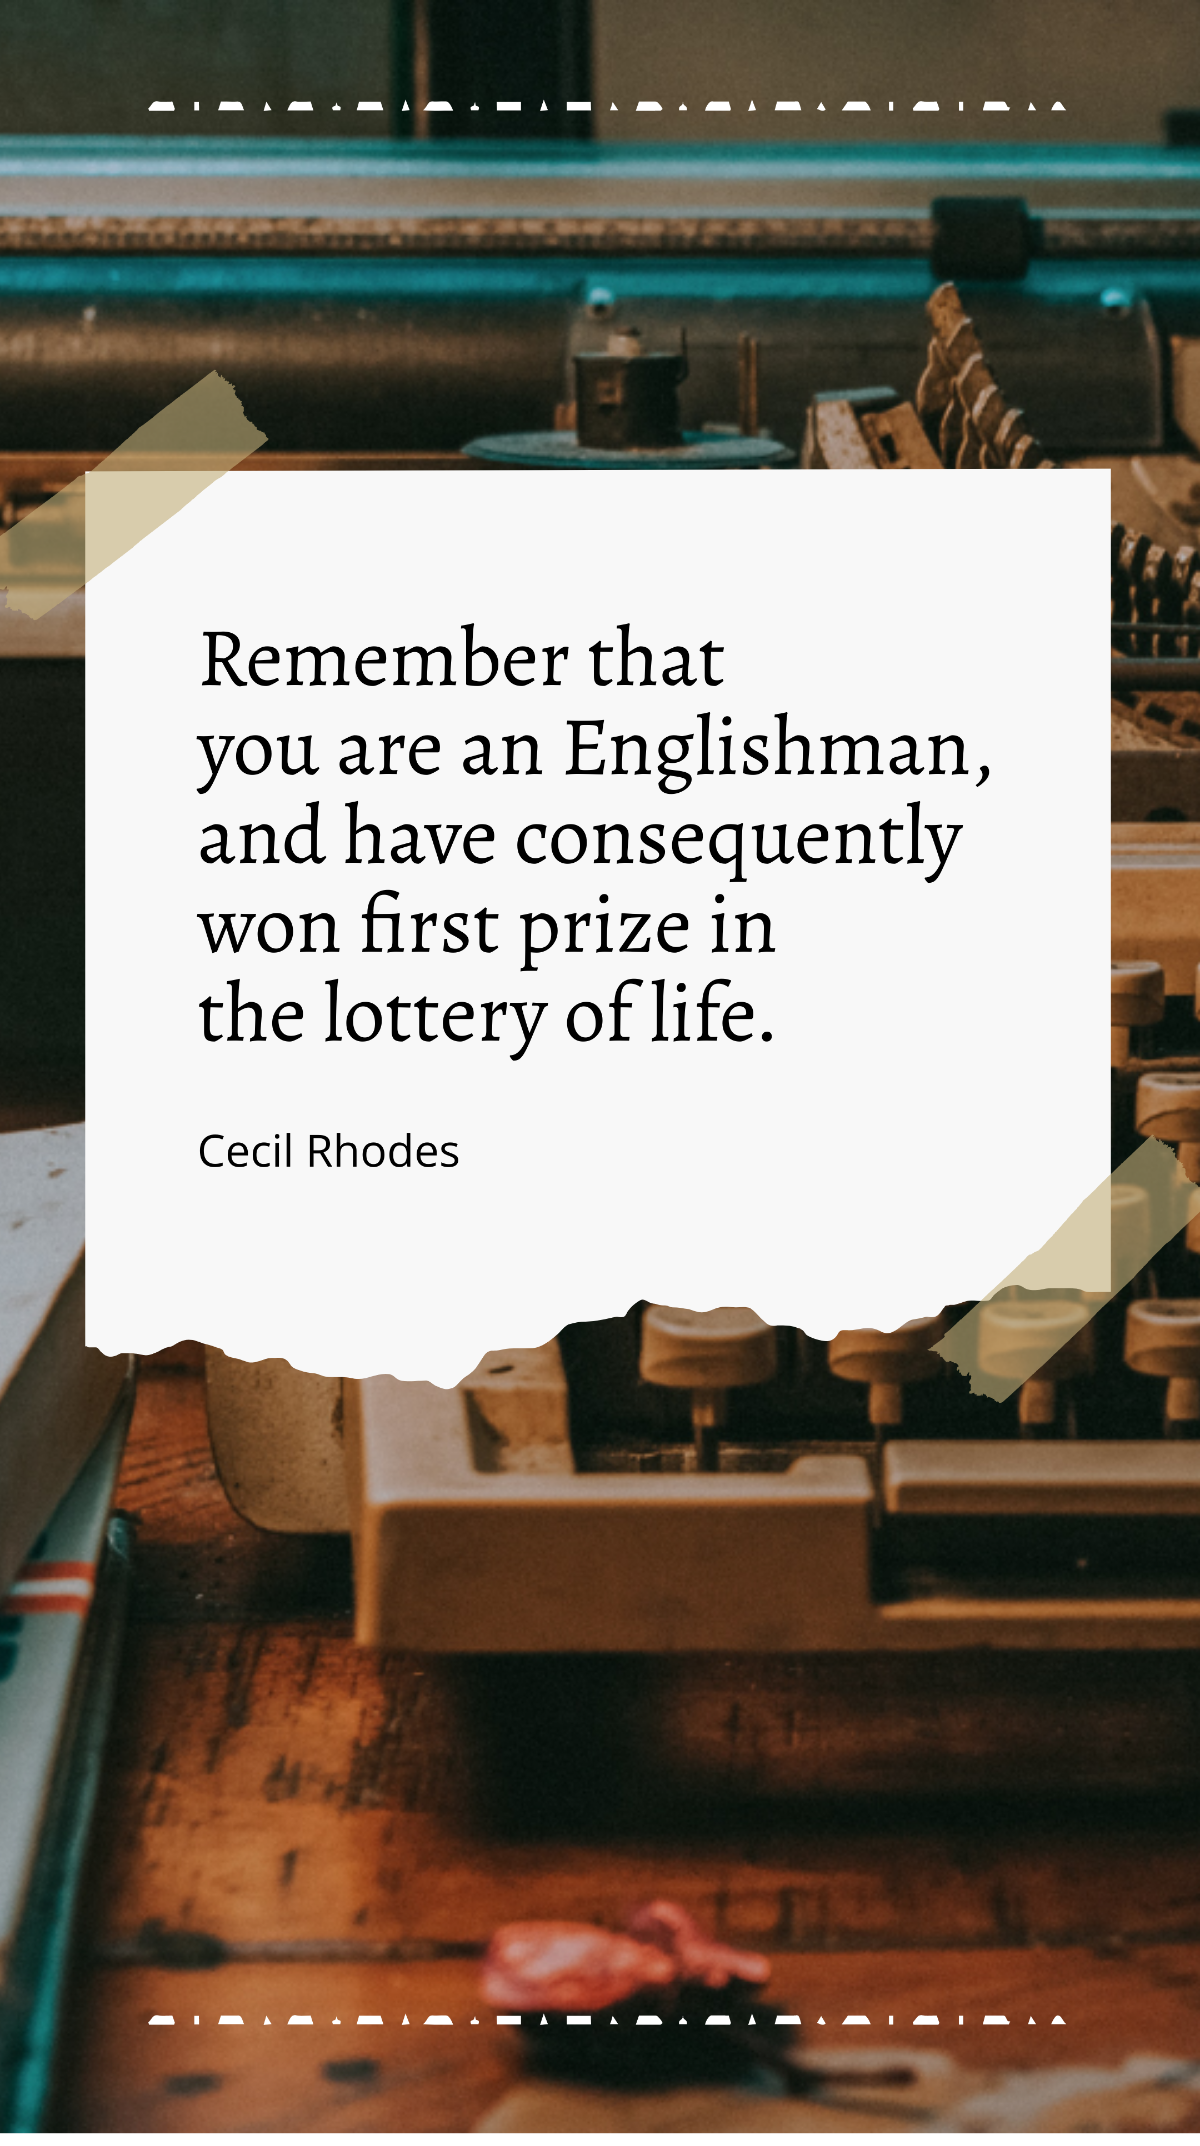 Cecil Rhodes - Remember that you are an Englishman, and have consequently won first prize in the lottery of life. Template